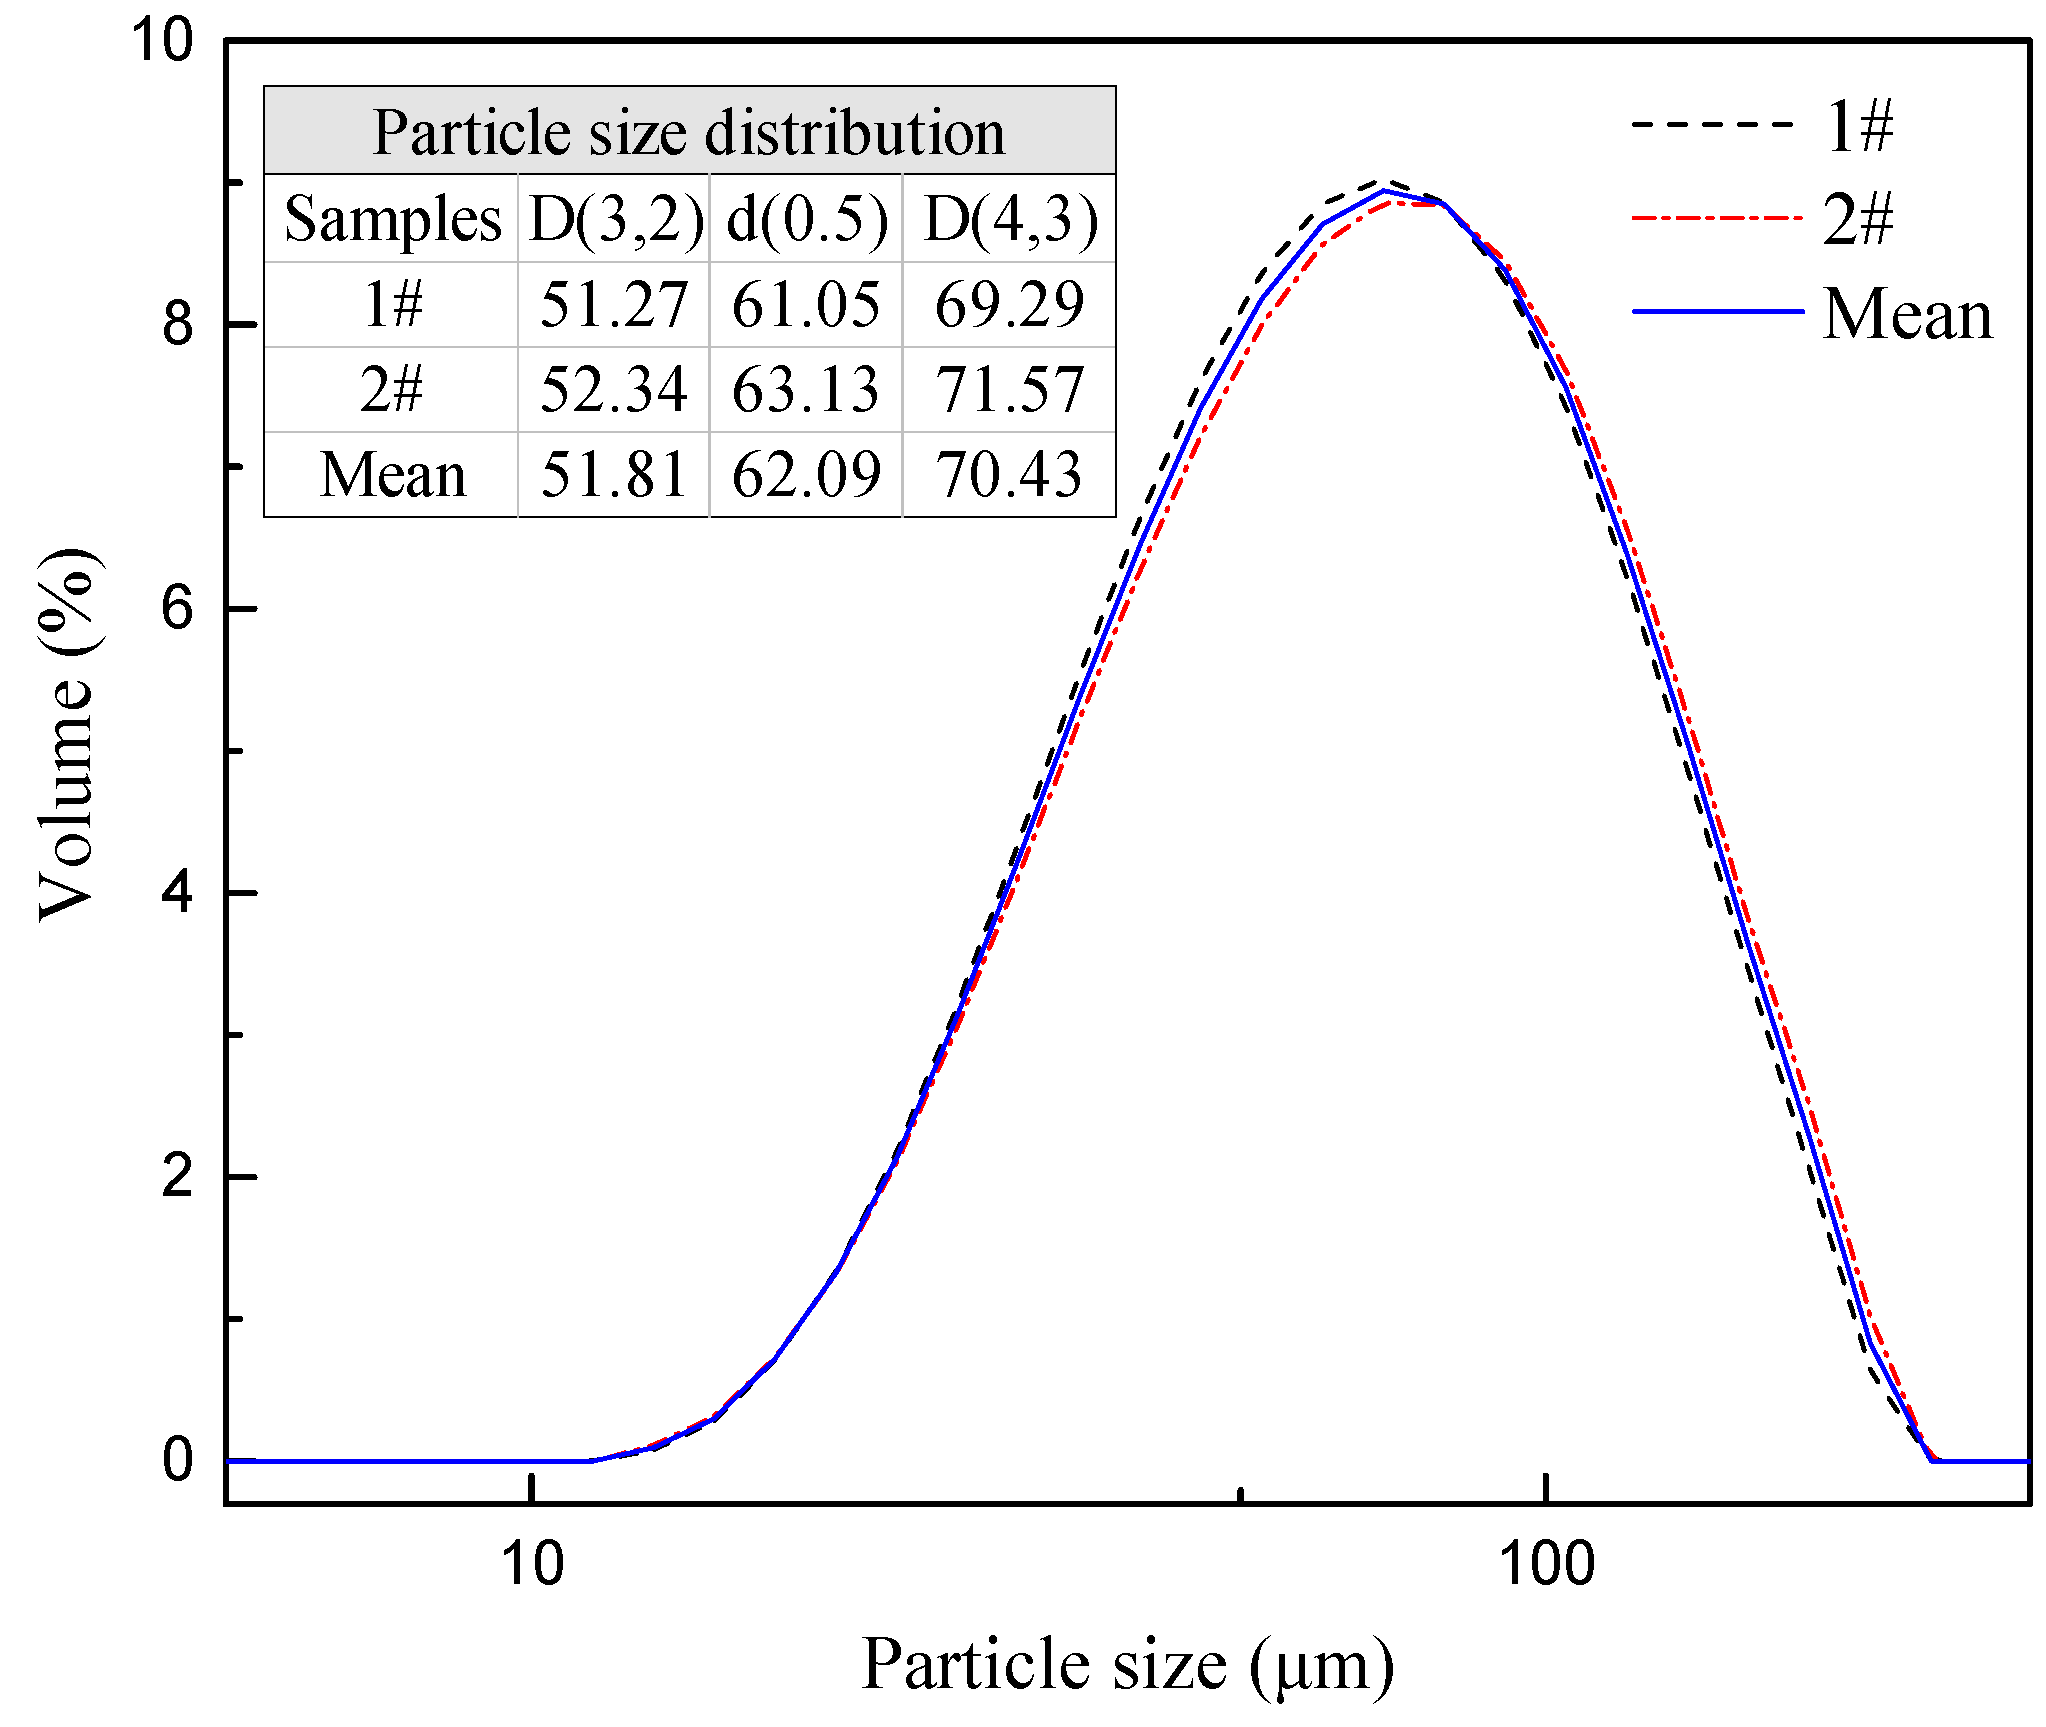 Salg Snazzy Appel til at være attraktiv Crystals | Free Full-Text | Comparison Analysis of the Calculation Methods  for Particle Diameter